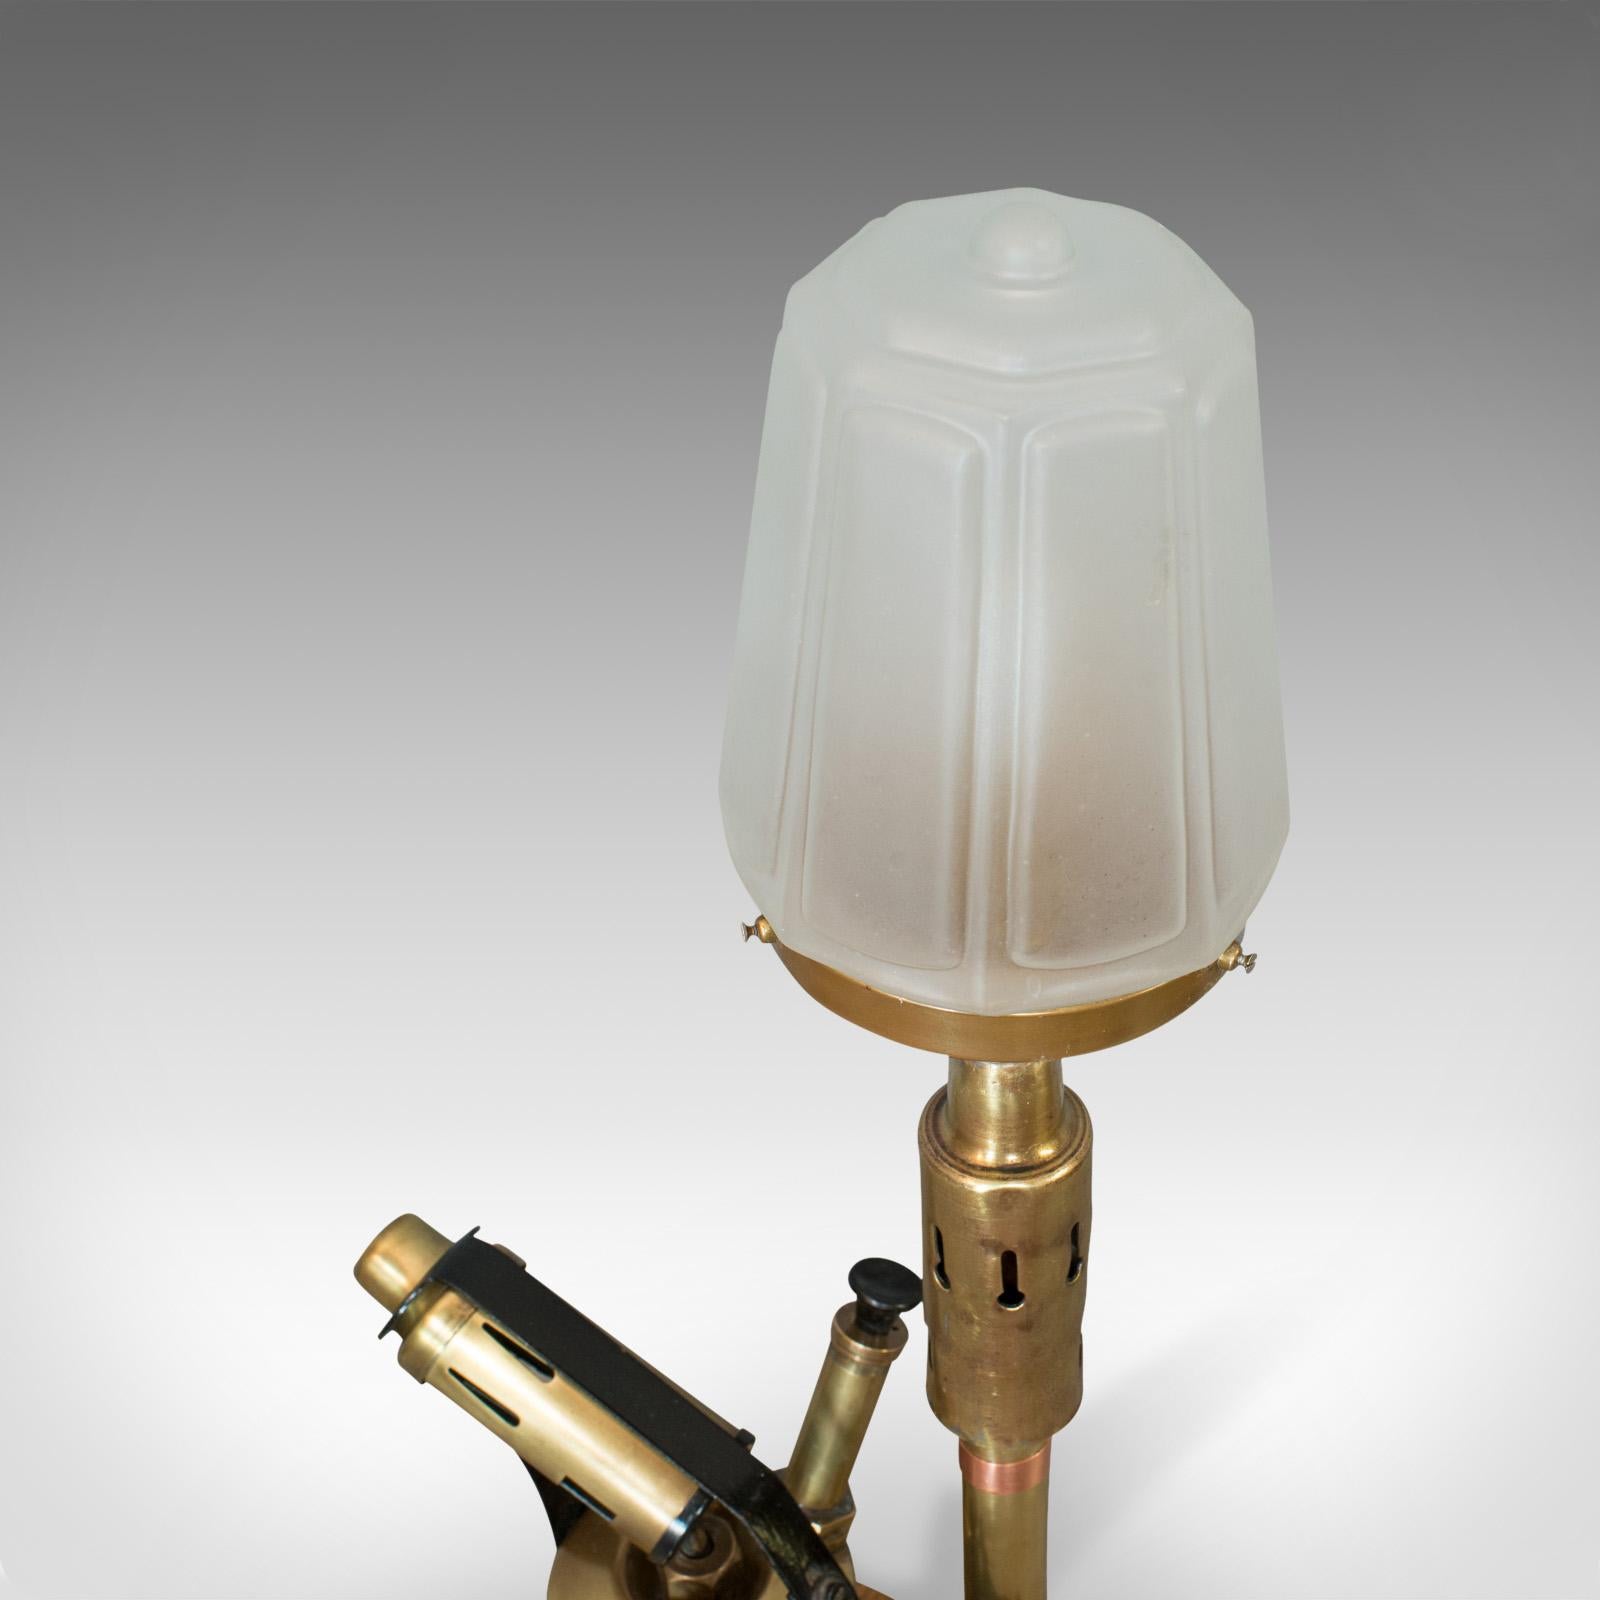 20th Century Vintage Decorative Lamp, English, Brass, Blow Torch, Light, Shade, Oak Base For Sale